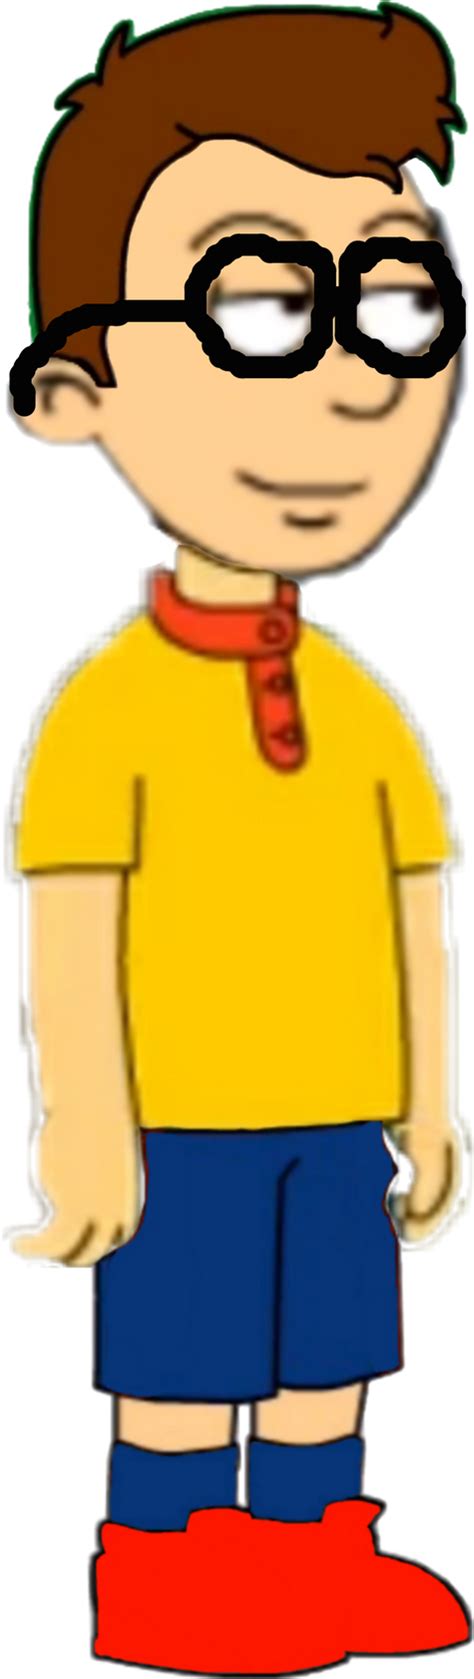 Hair Caillou Comedy World Glasses Png By Isaachelton On Deviantart